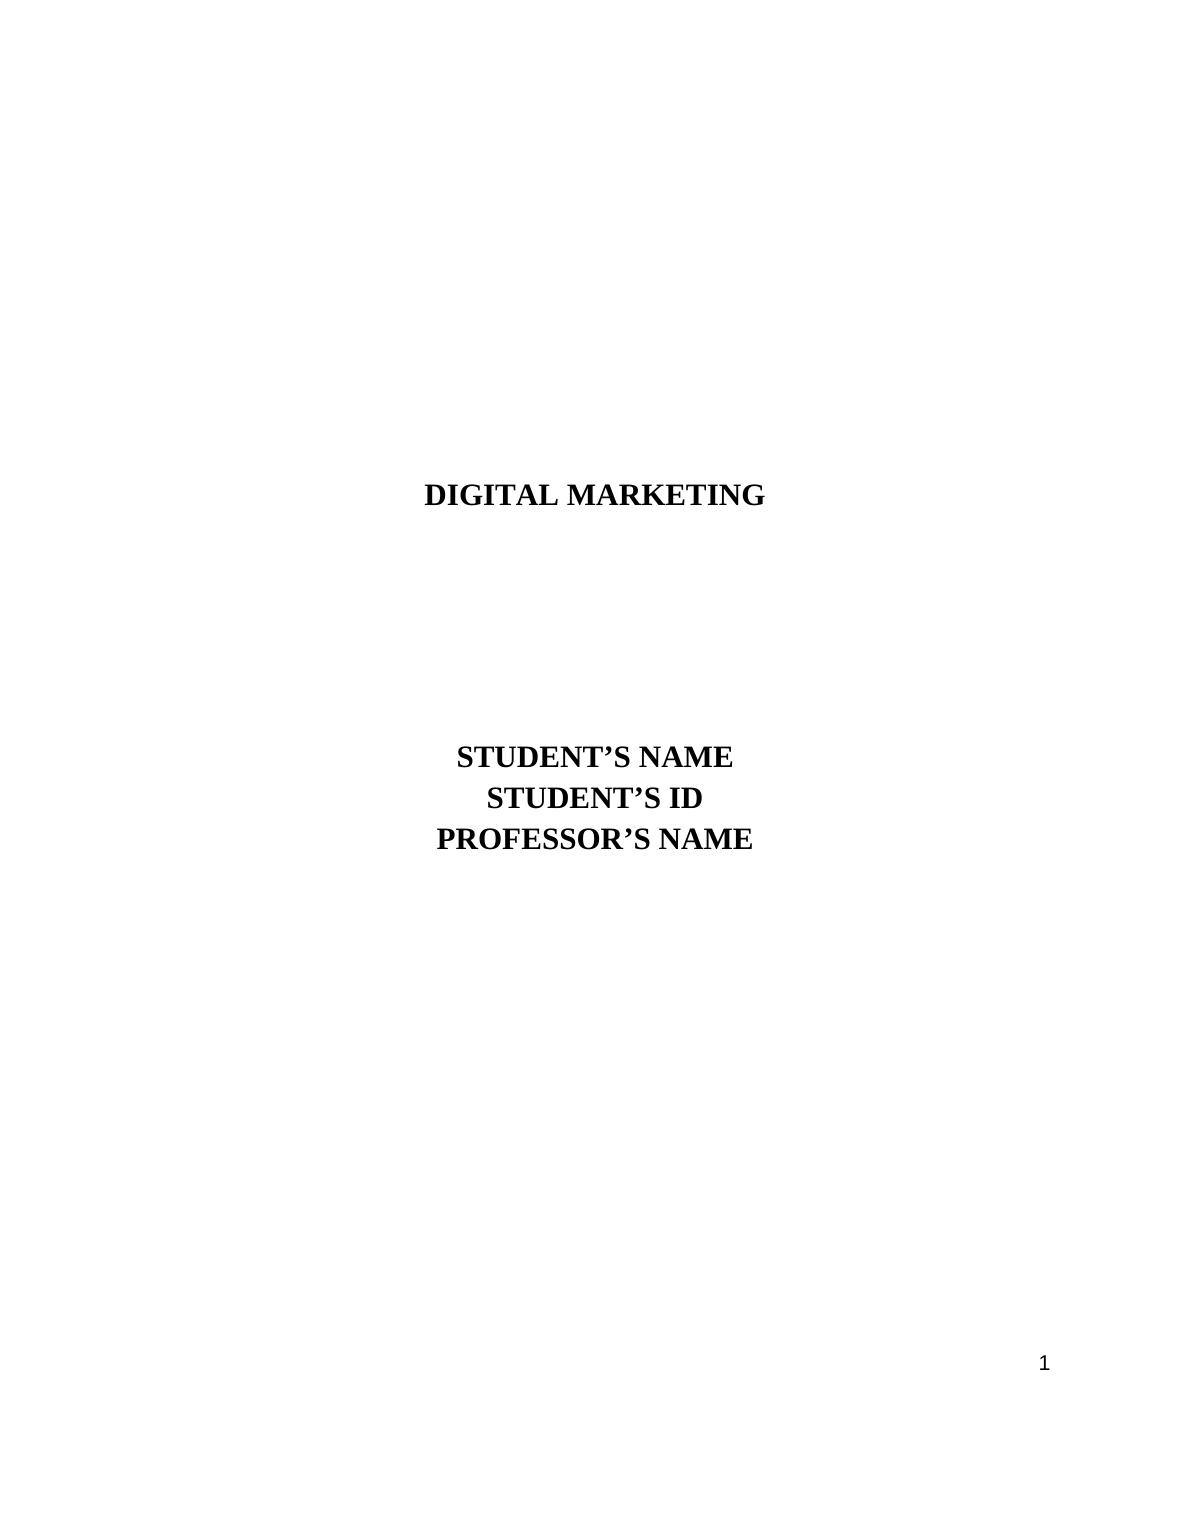 Use of Digital Marketing Assignment_1